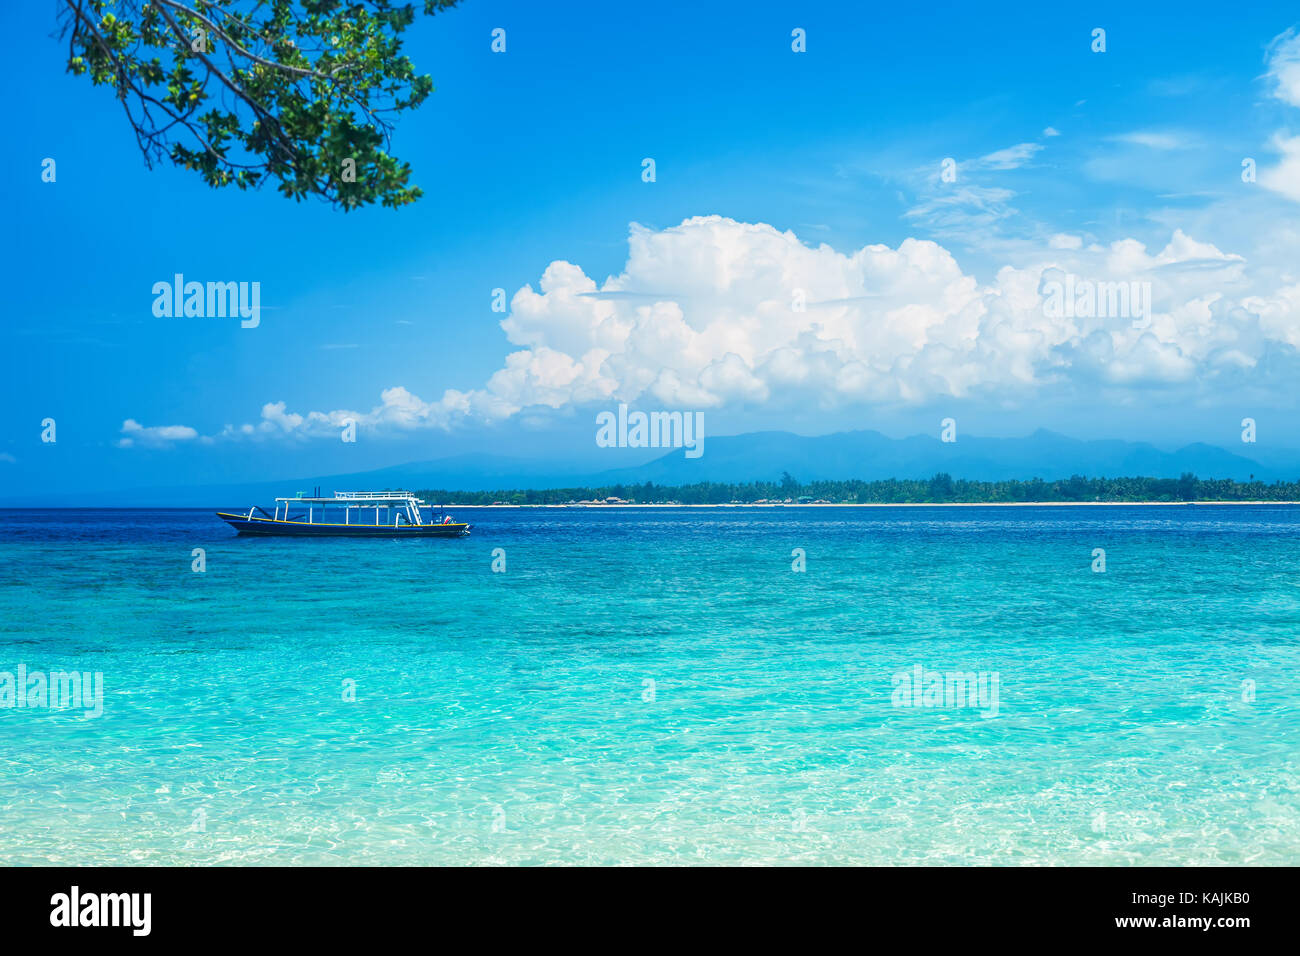 Beautiful tropical turquoise sea with boat on horizon. Vacation Stock Photo